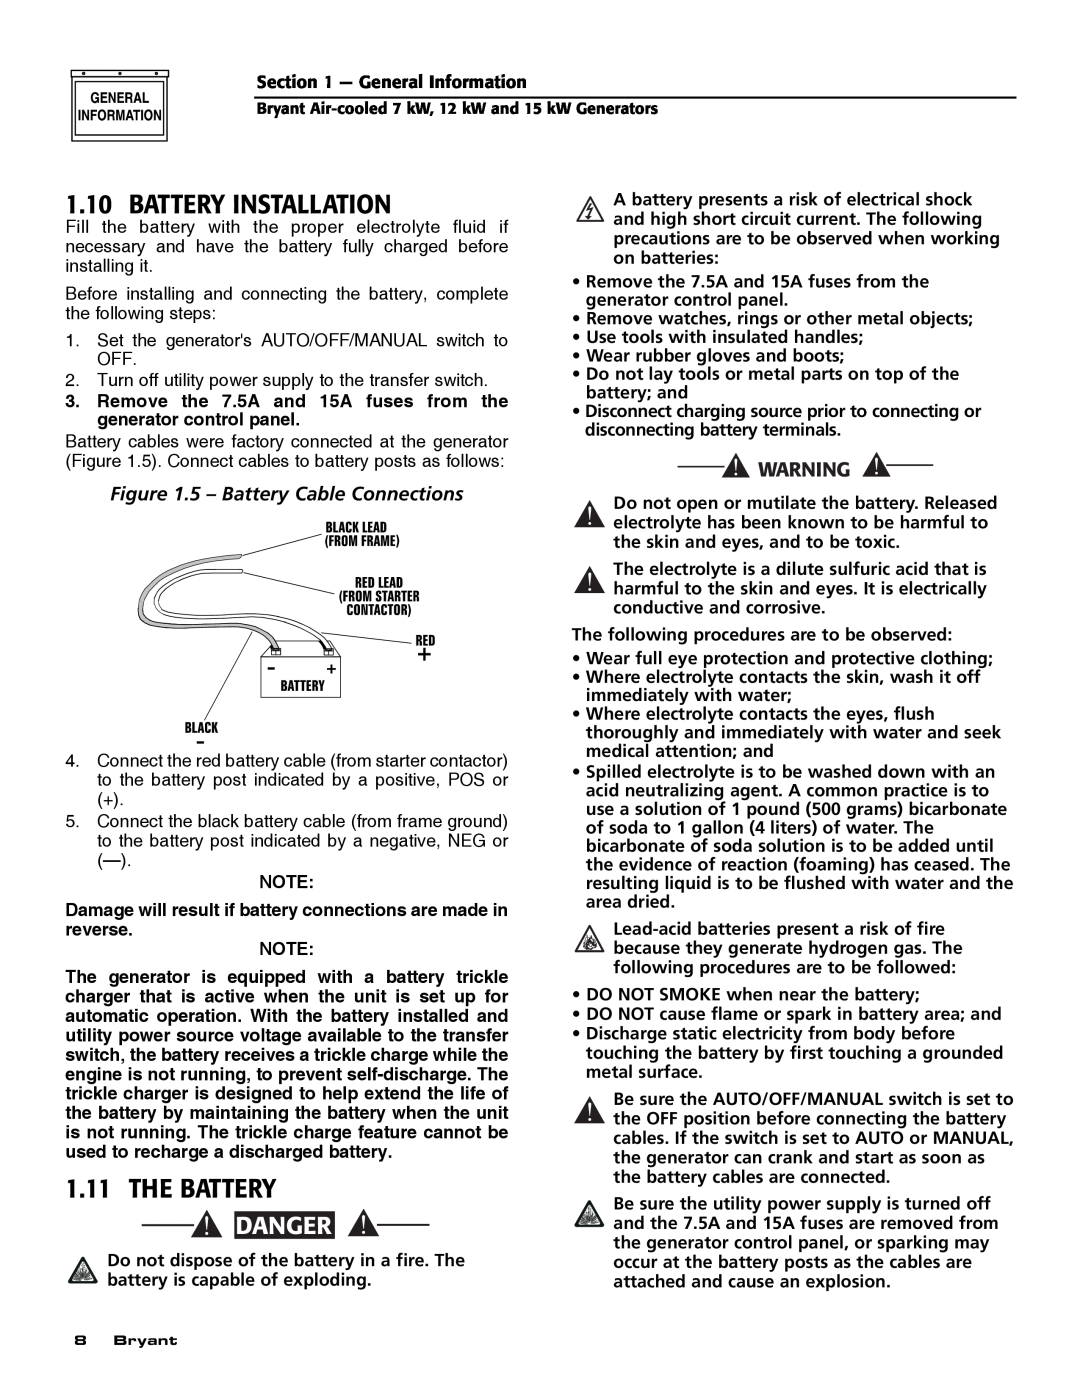 Bryant ASPAS1BBA015, ASPAS1BBA007, ASPAS1BBA012 Battery Installation, The Battery, 5 – Battery Cable Connections, Danger 